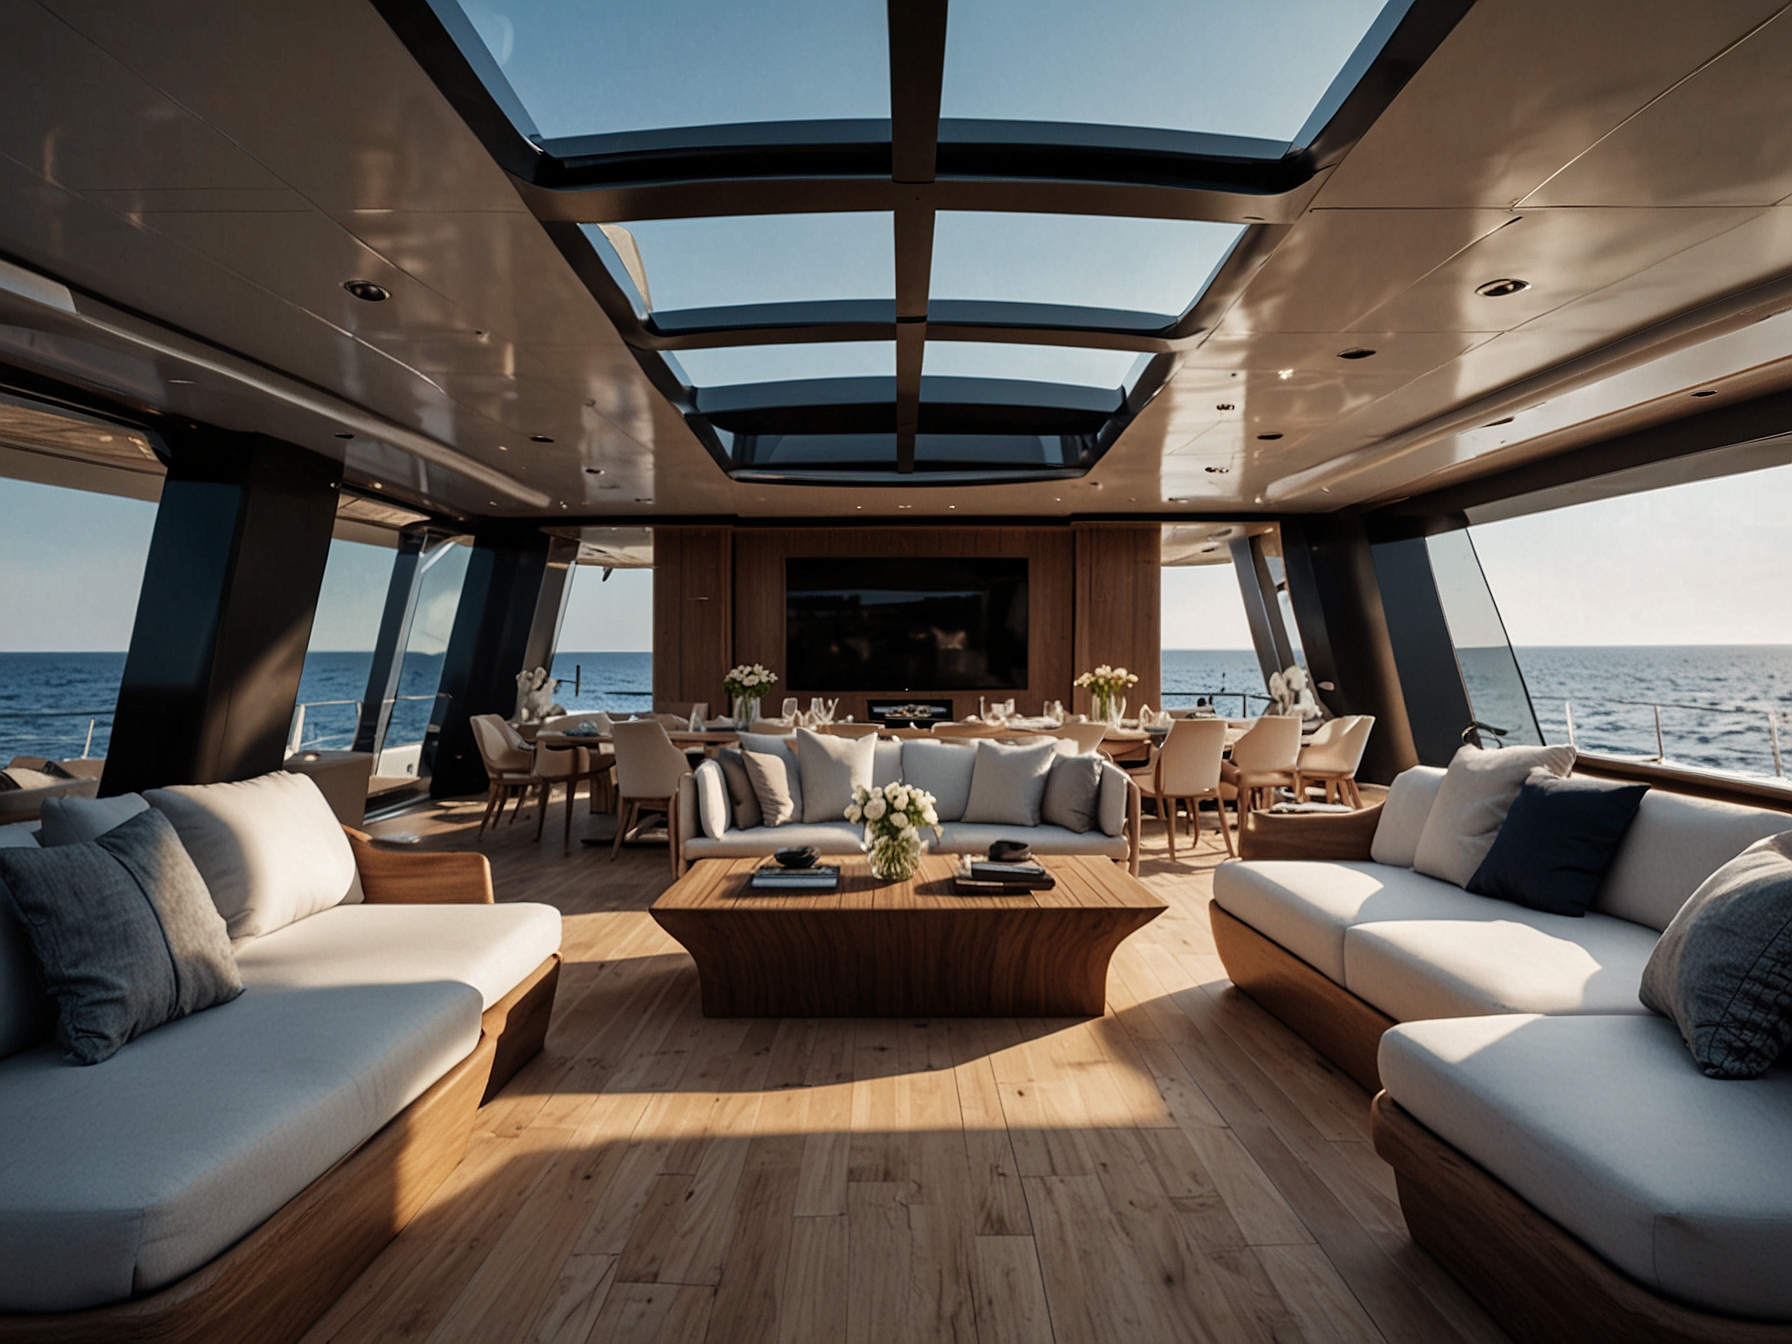 The exterior of the CLX99 Superyacht displays its elegant lines and state-of-the-art materials, capturing expansive deck spaces perfect for socializing and sunbathing.